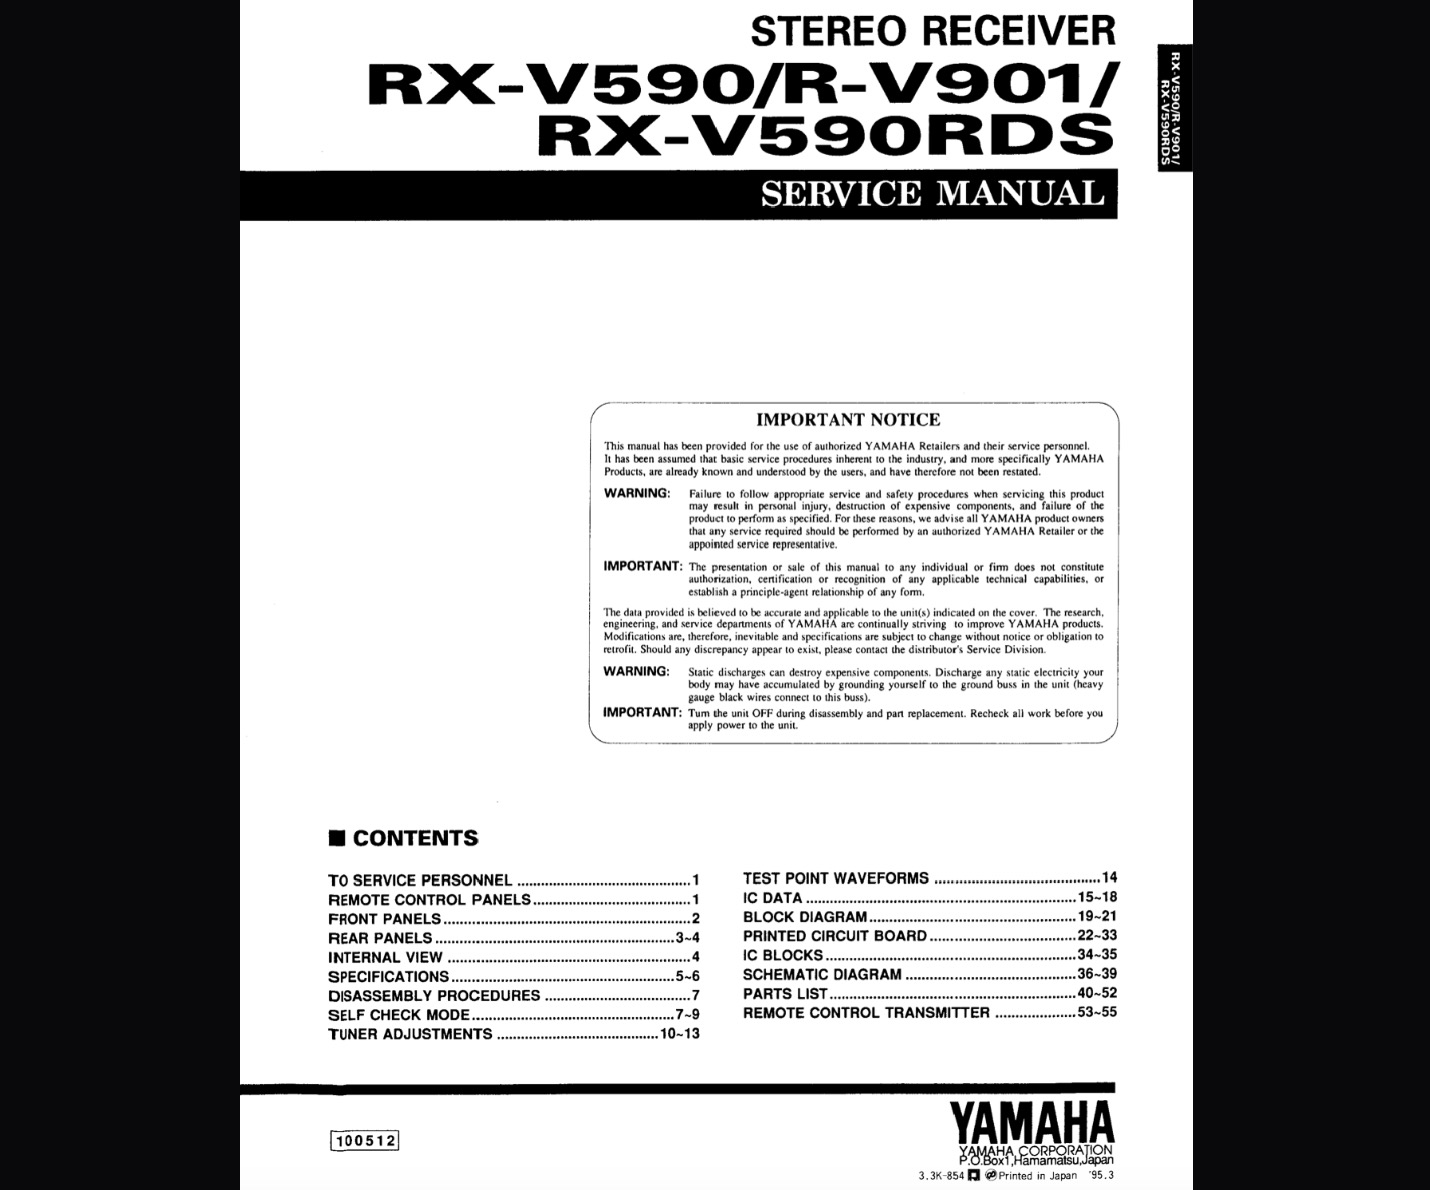 Yamaha RX-V590, R-V901, RX-V590RDS Stereo Receiver Service Manual, Parts List, Exploded View, Wiring and Schematic Diagram